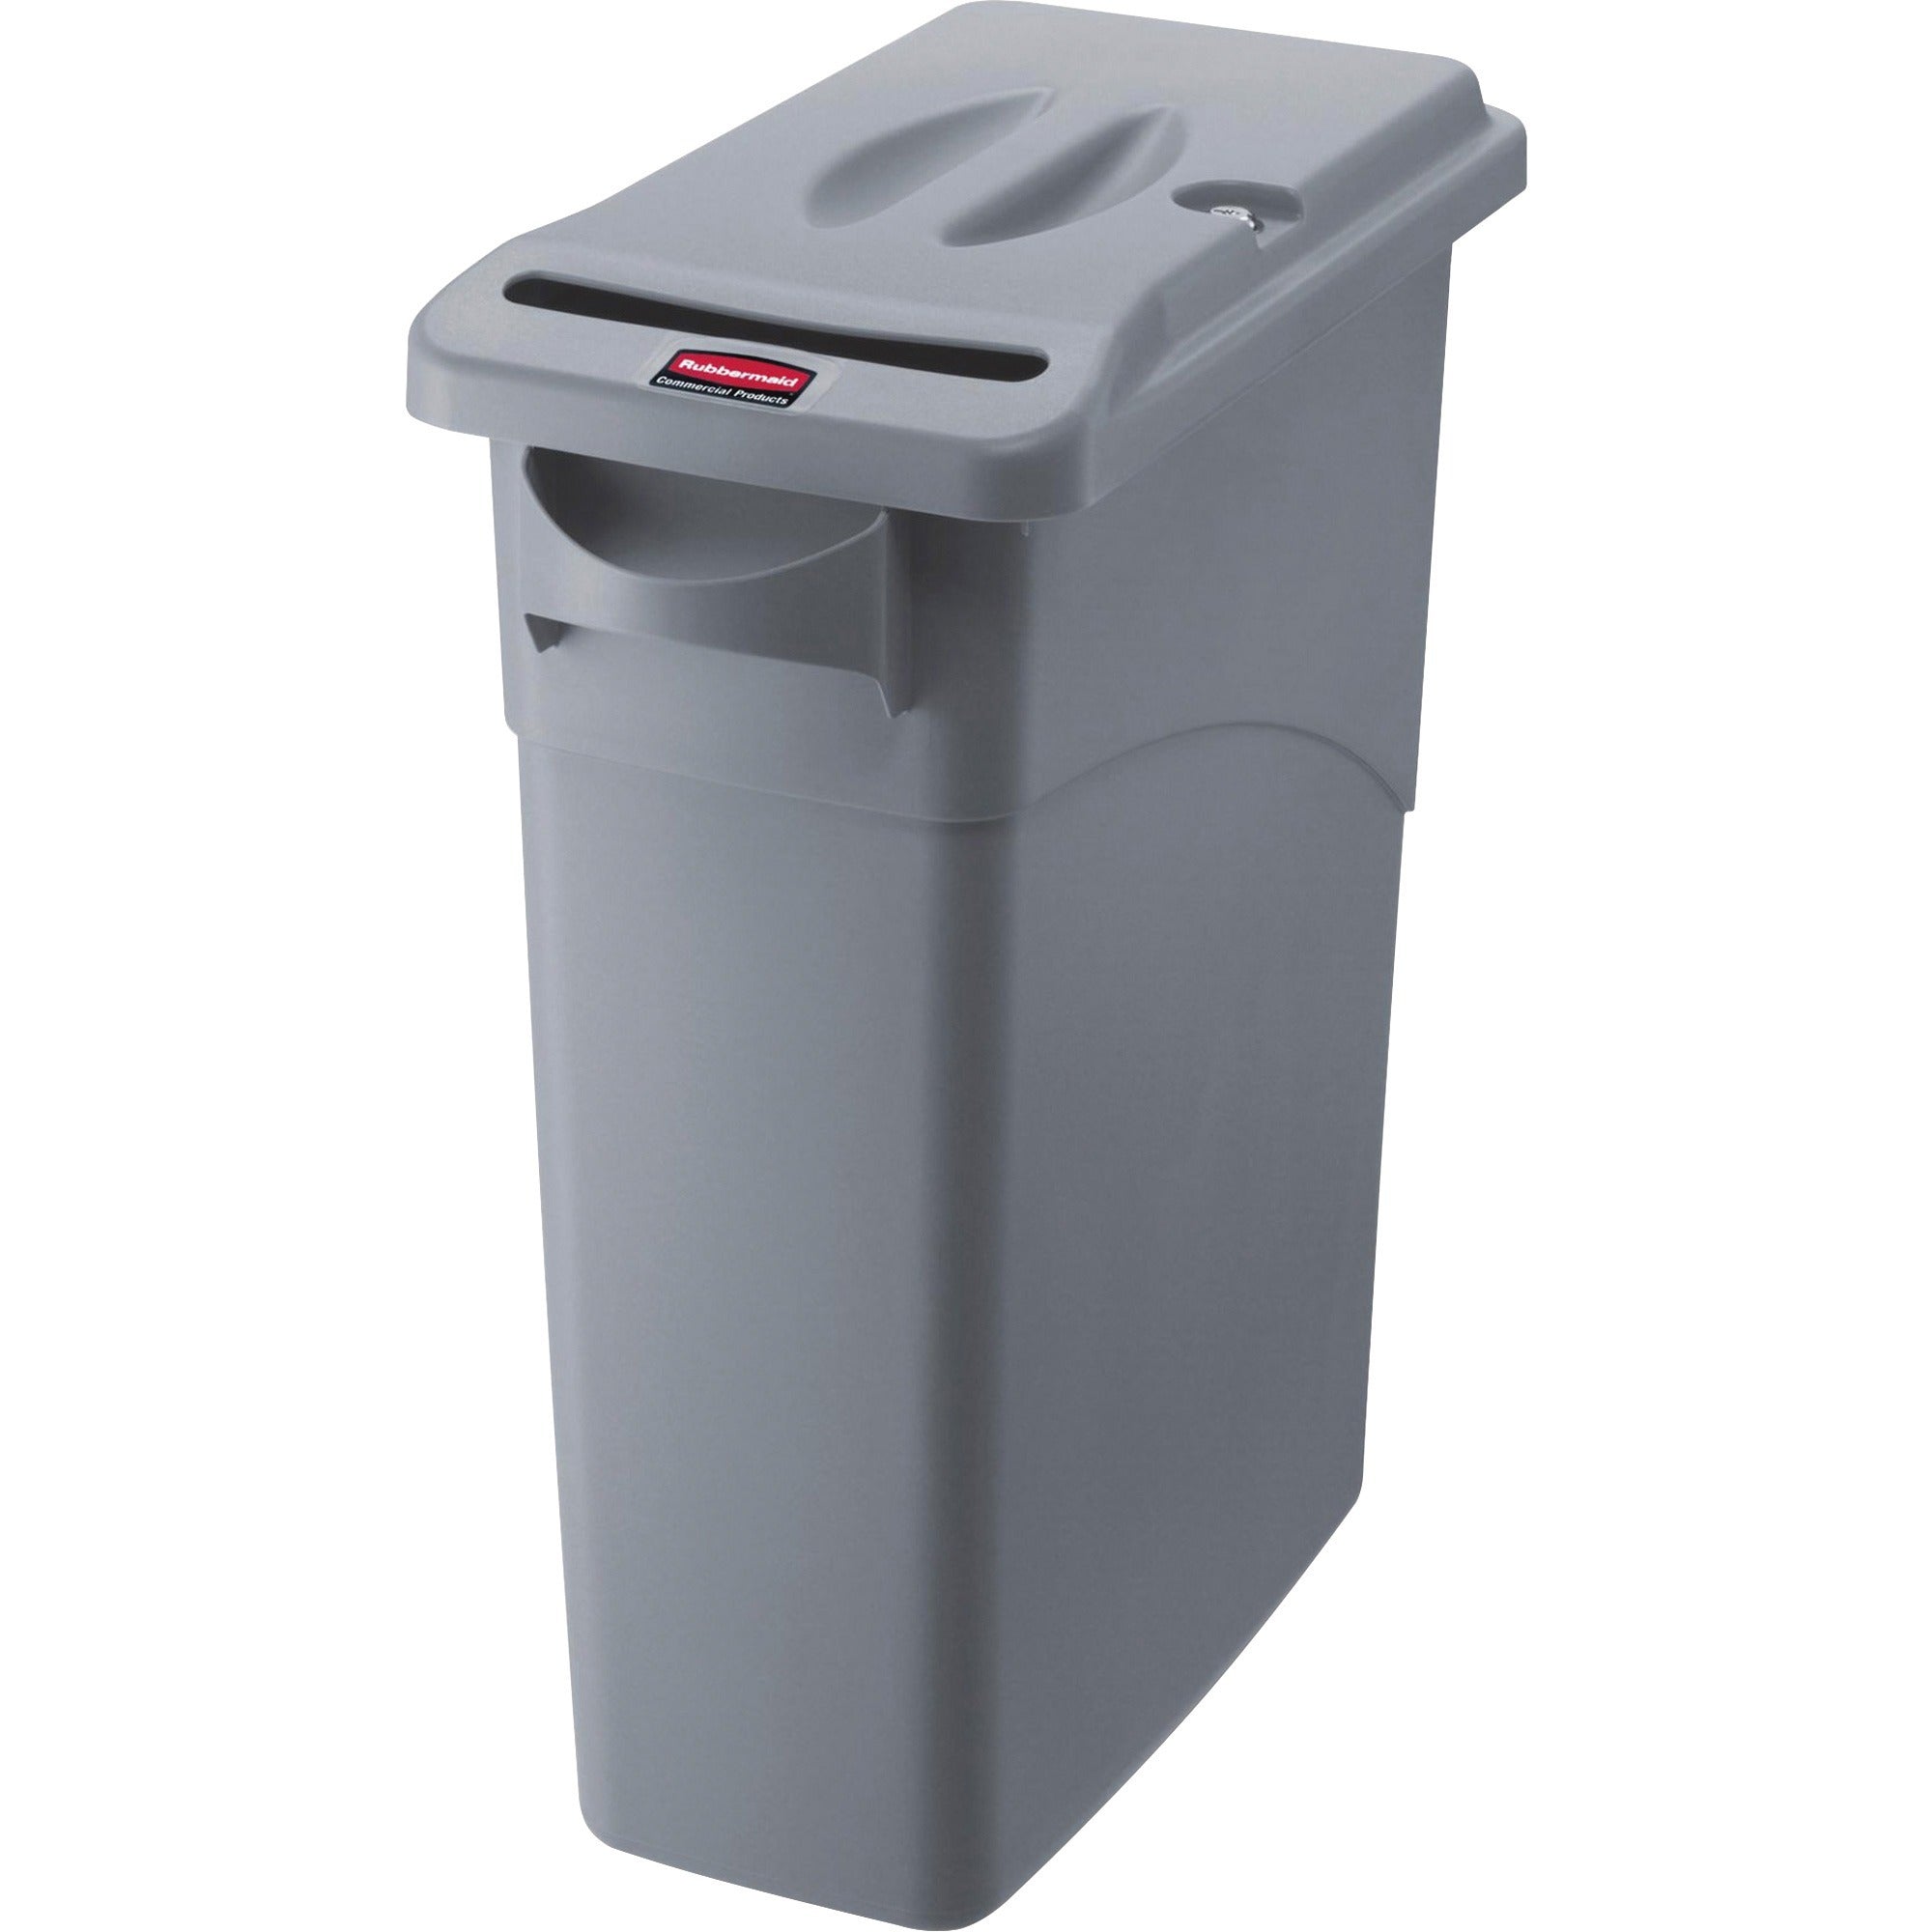 Rubbermaid Commercial Slim Jim Confidential Document Container w/Lid - External Dimensions: 11" Width x 22" Depth x 25" Height - 16 gal - Lid Lock Closure - Gray - For Document - 1 Each - 